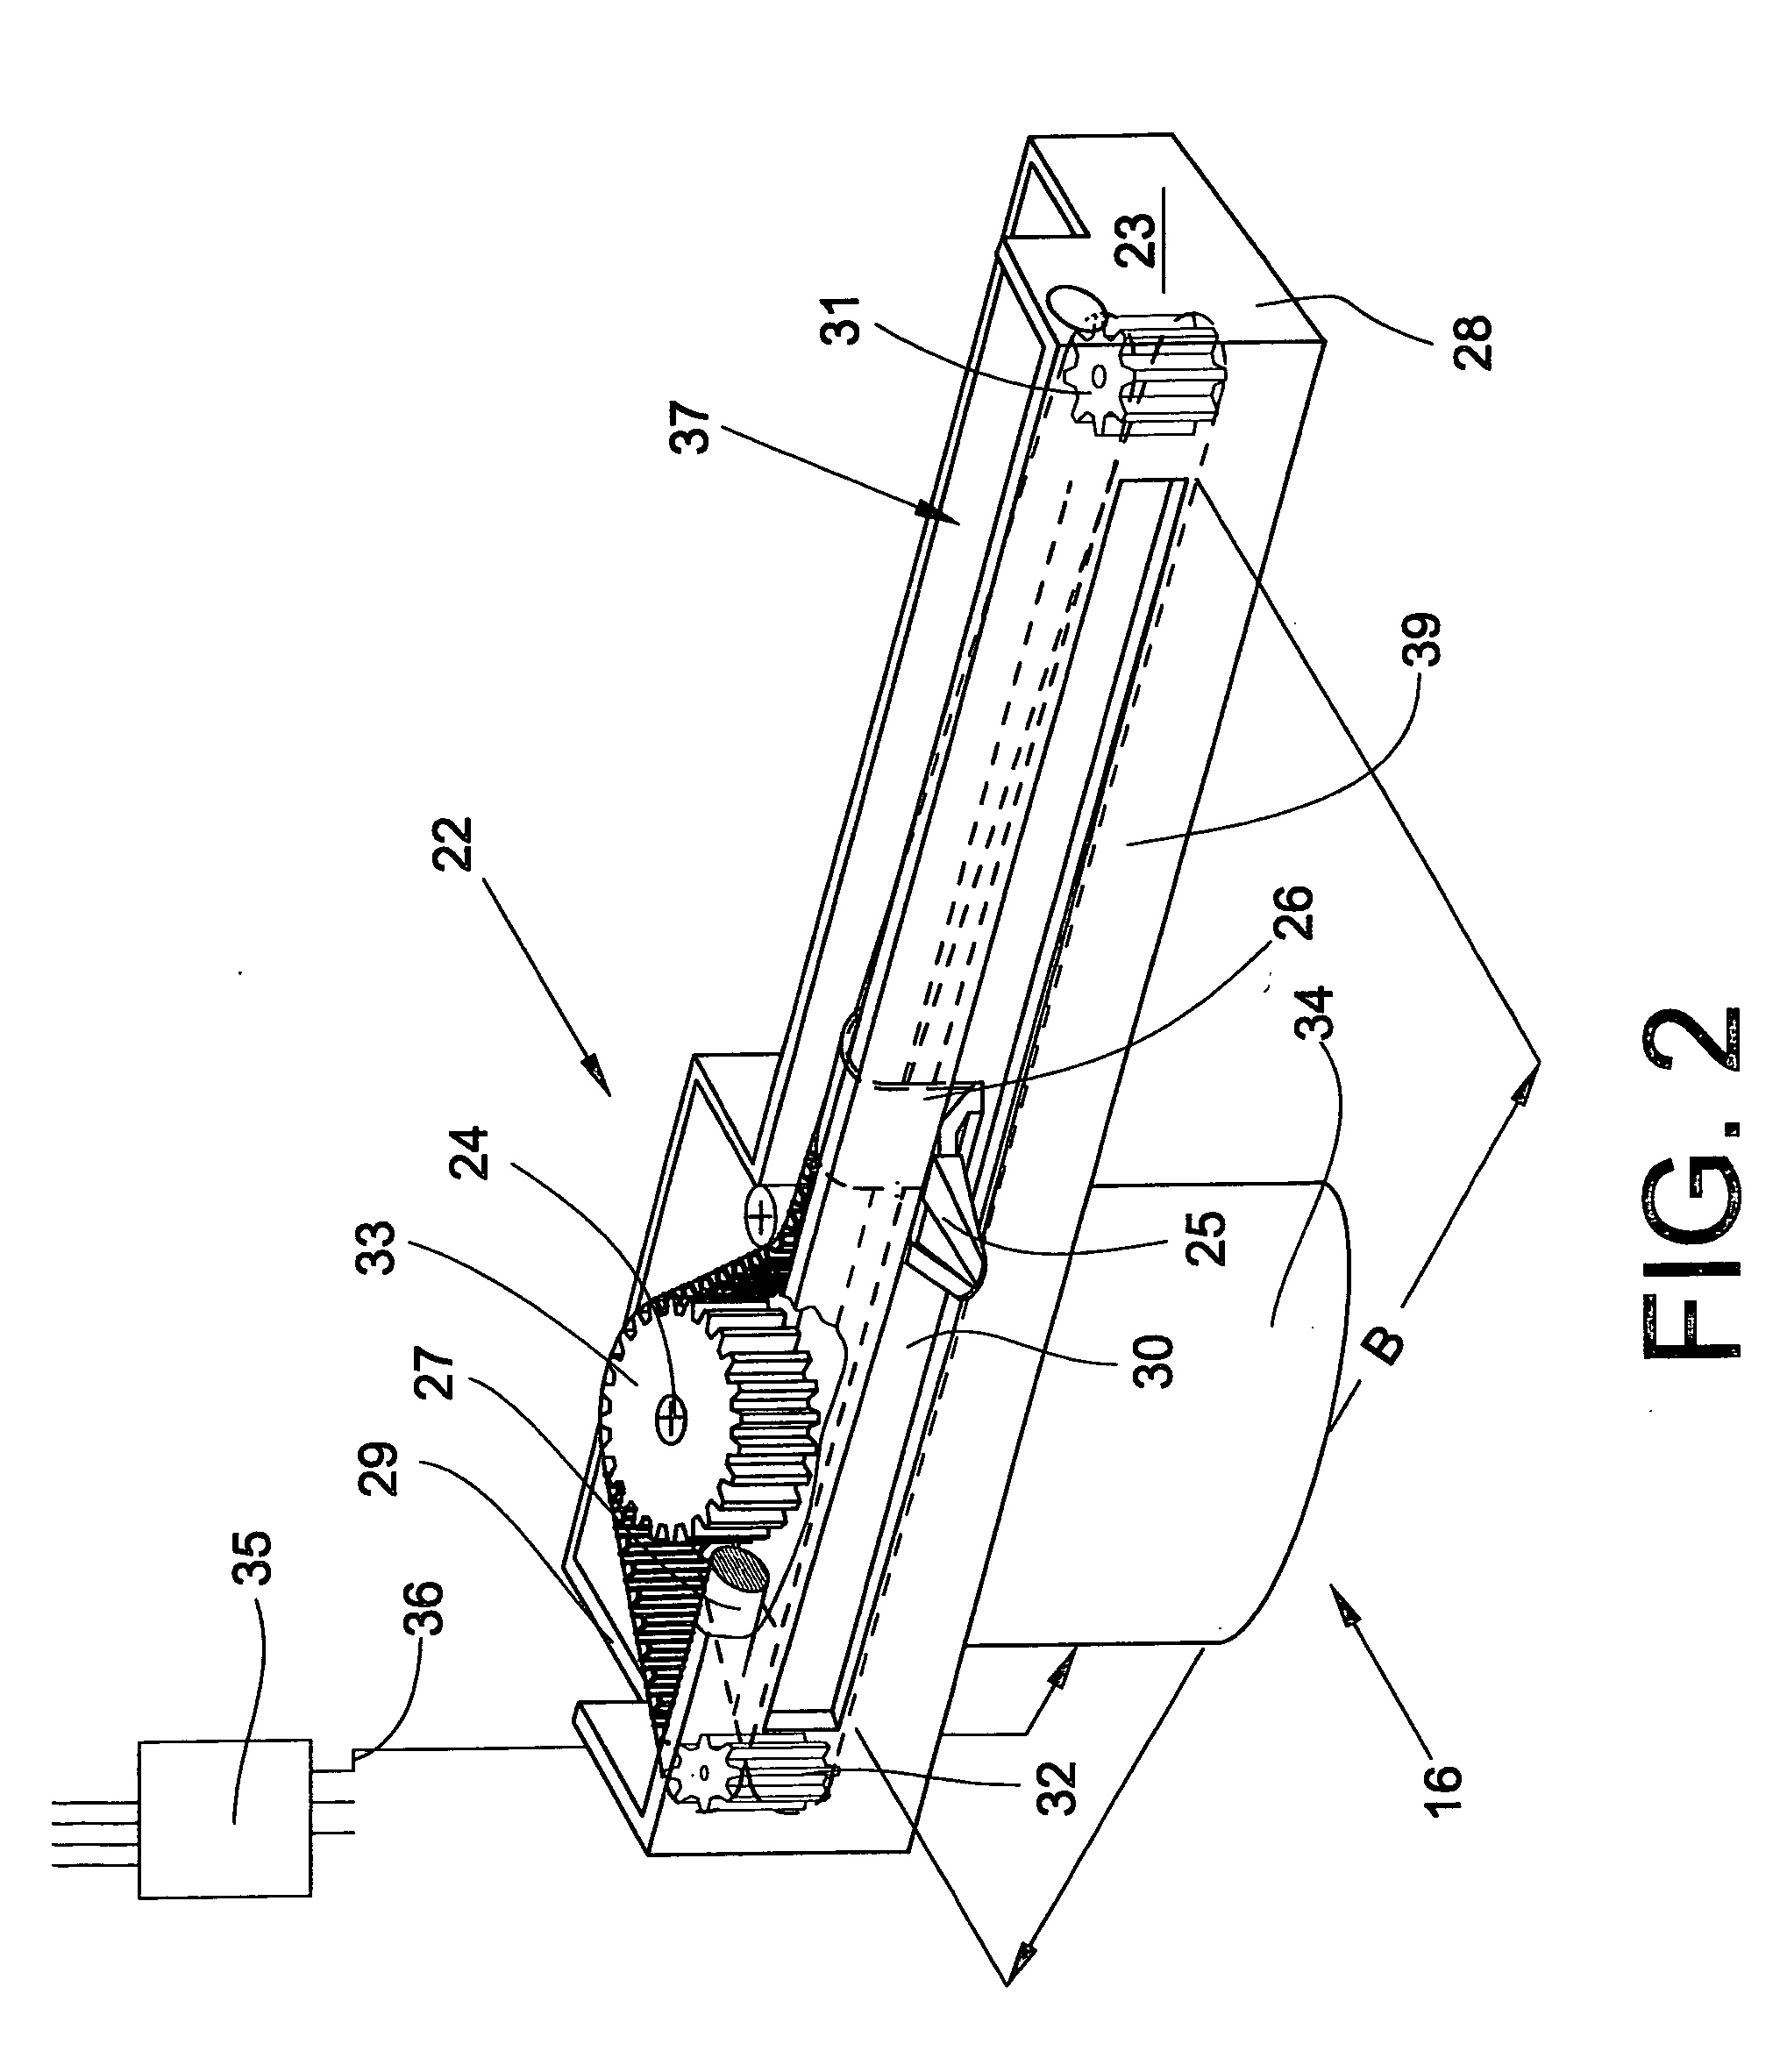 Method and device for determining the zero position of a yarn guide capable of cross-winding